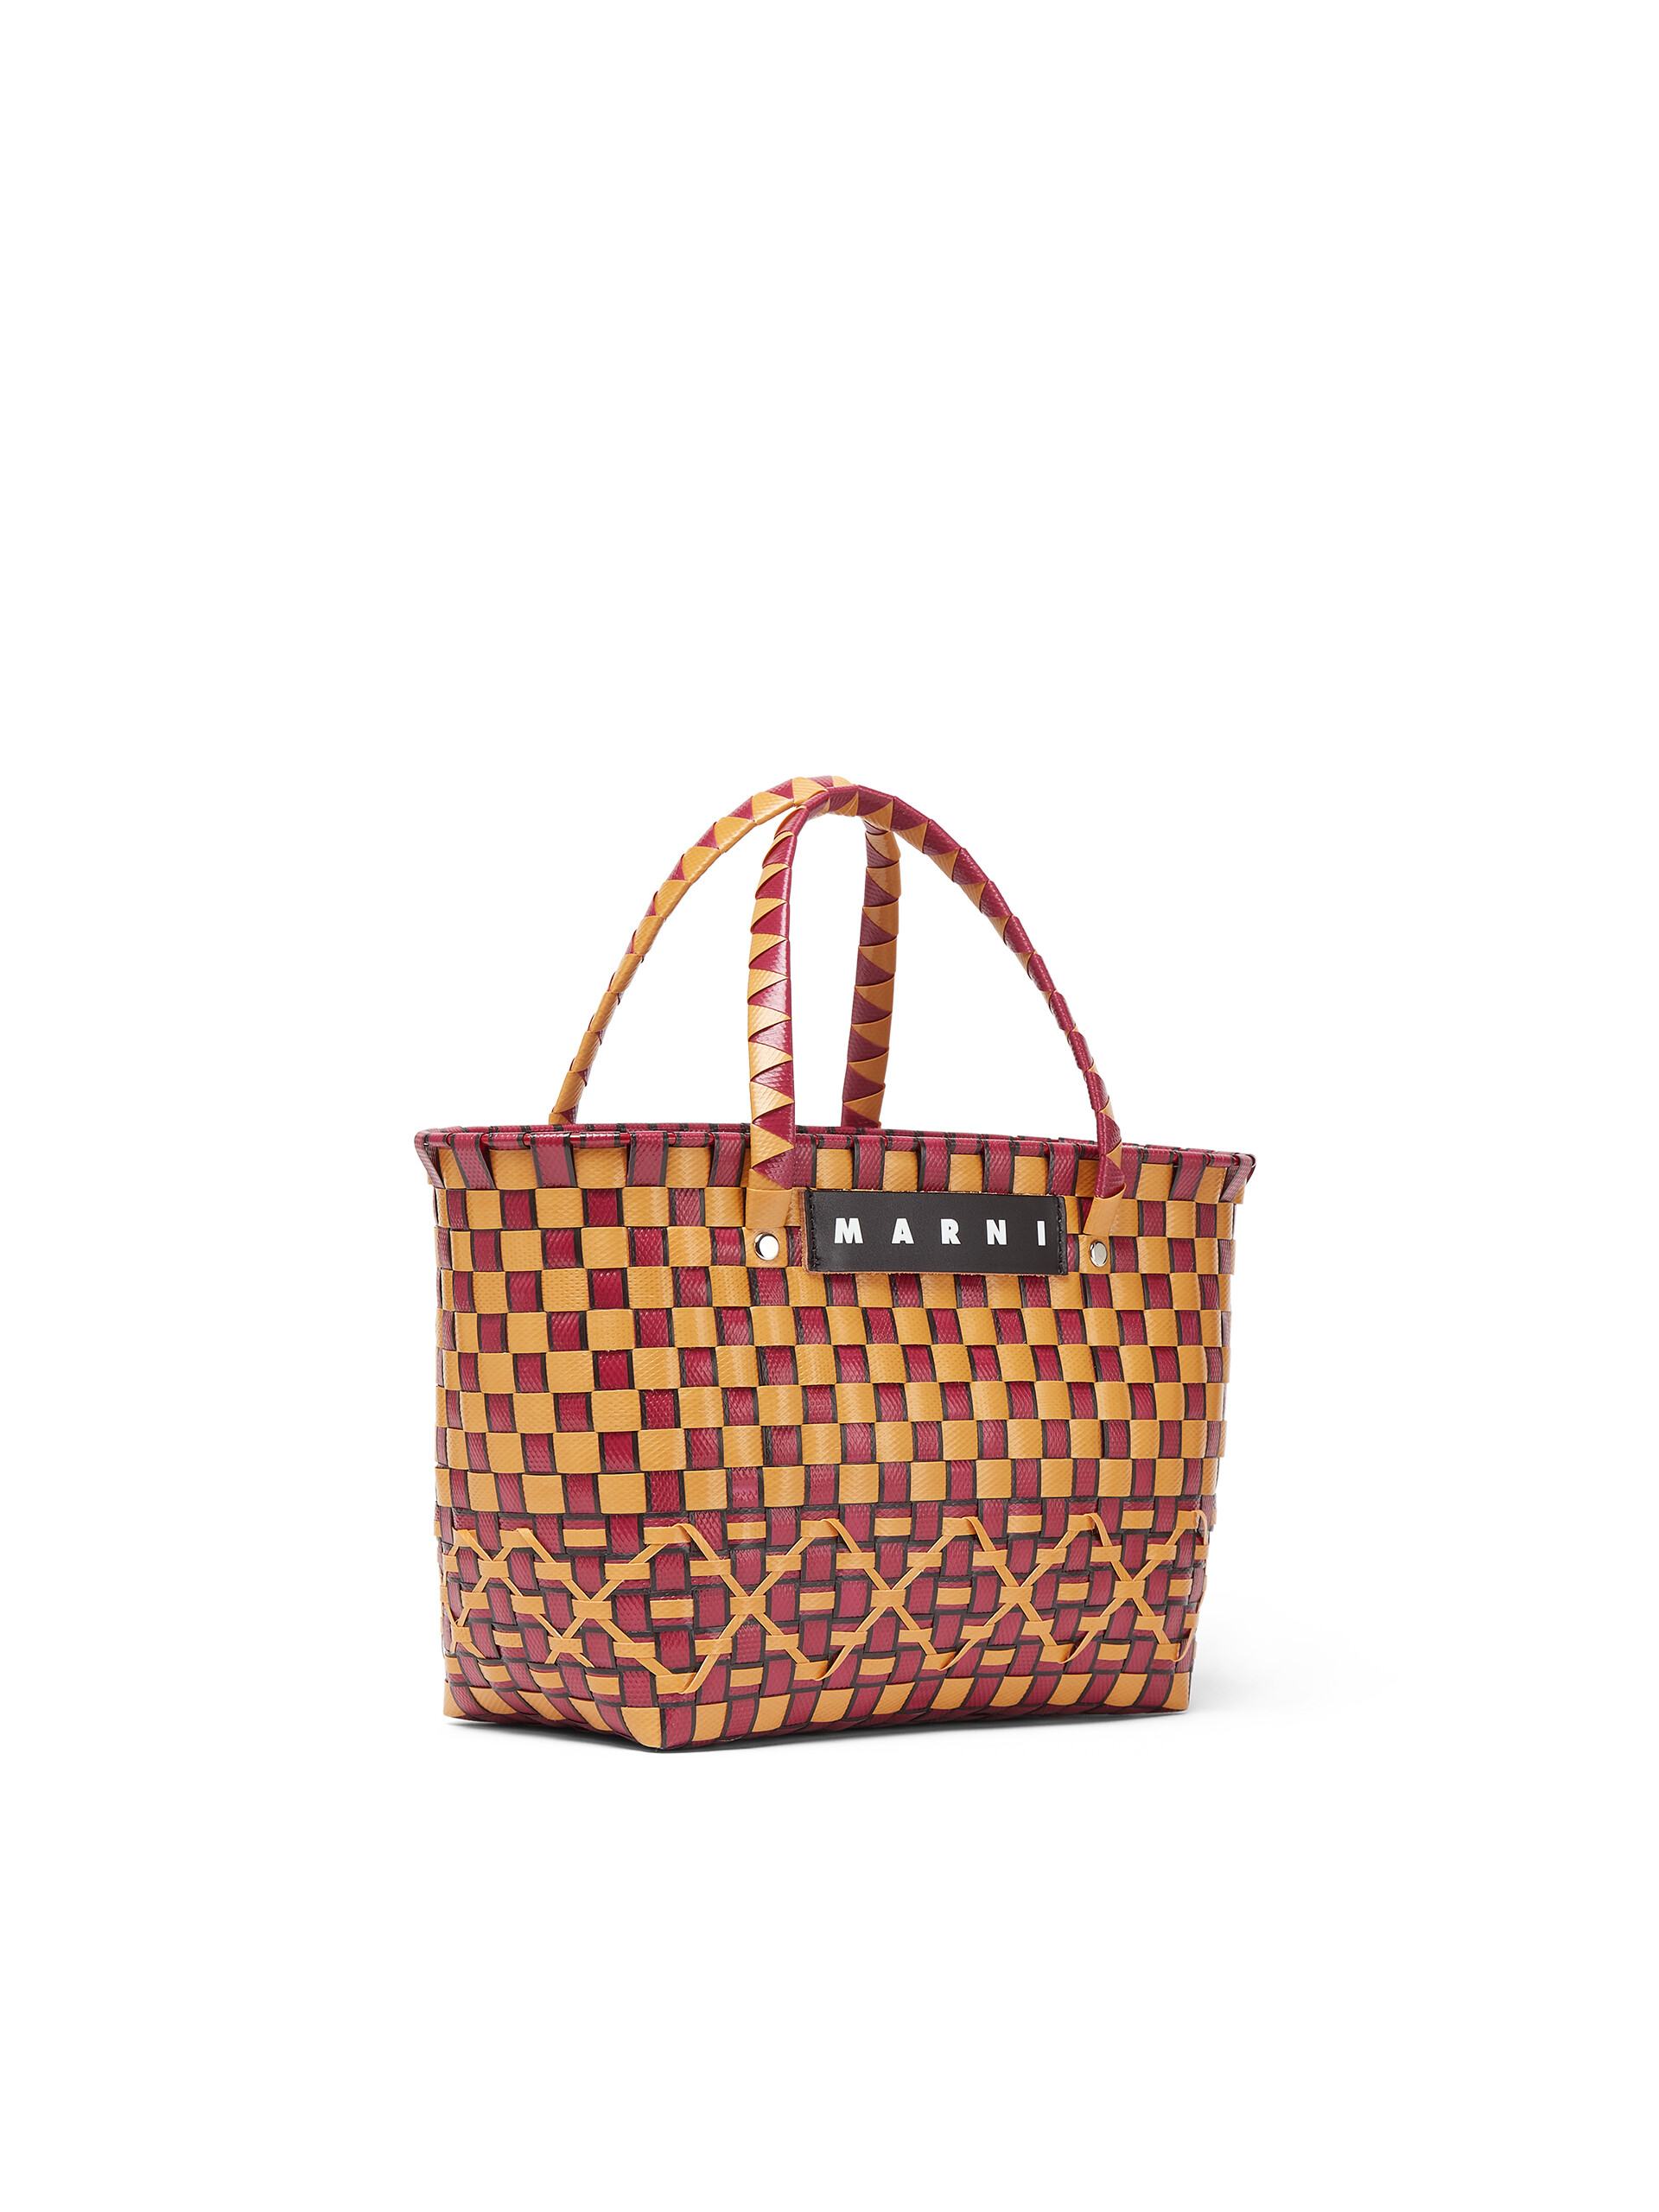 Picasso Brutal Fjord MARNI MARKET OVAL bag in orange and bordeaux woven material | Marni